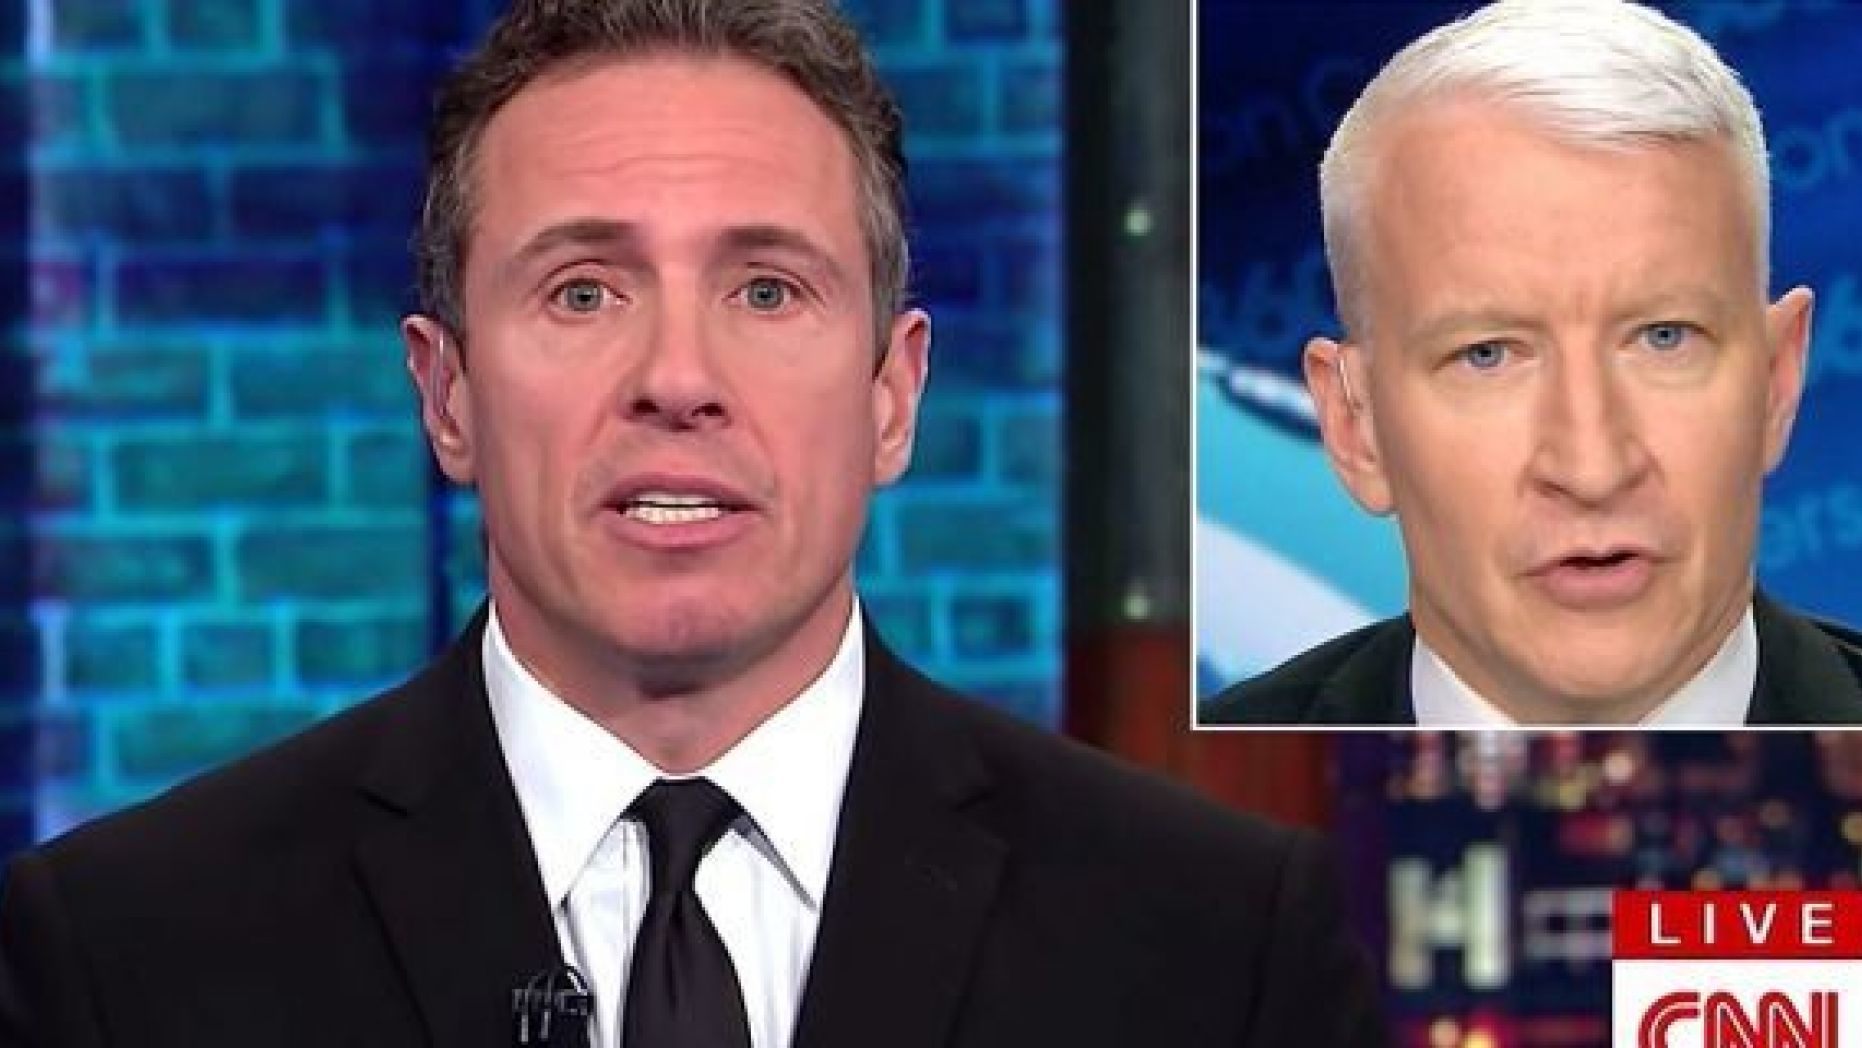 CNN hosts Chris Cuomo and Anderson Cooper offer their option more than typical news anchors, according to media critics.